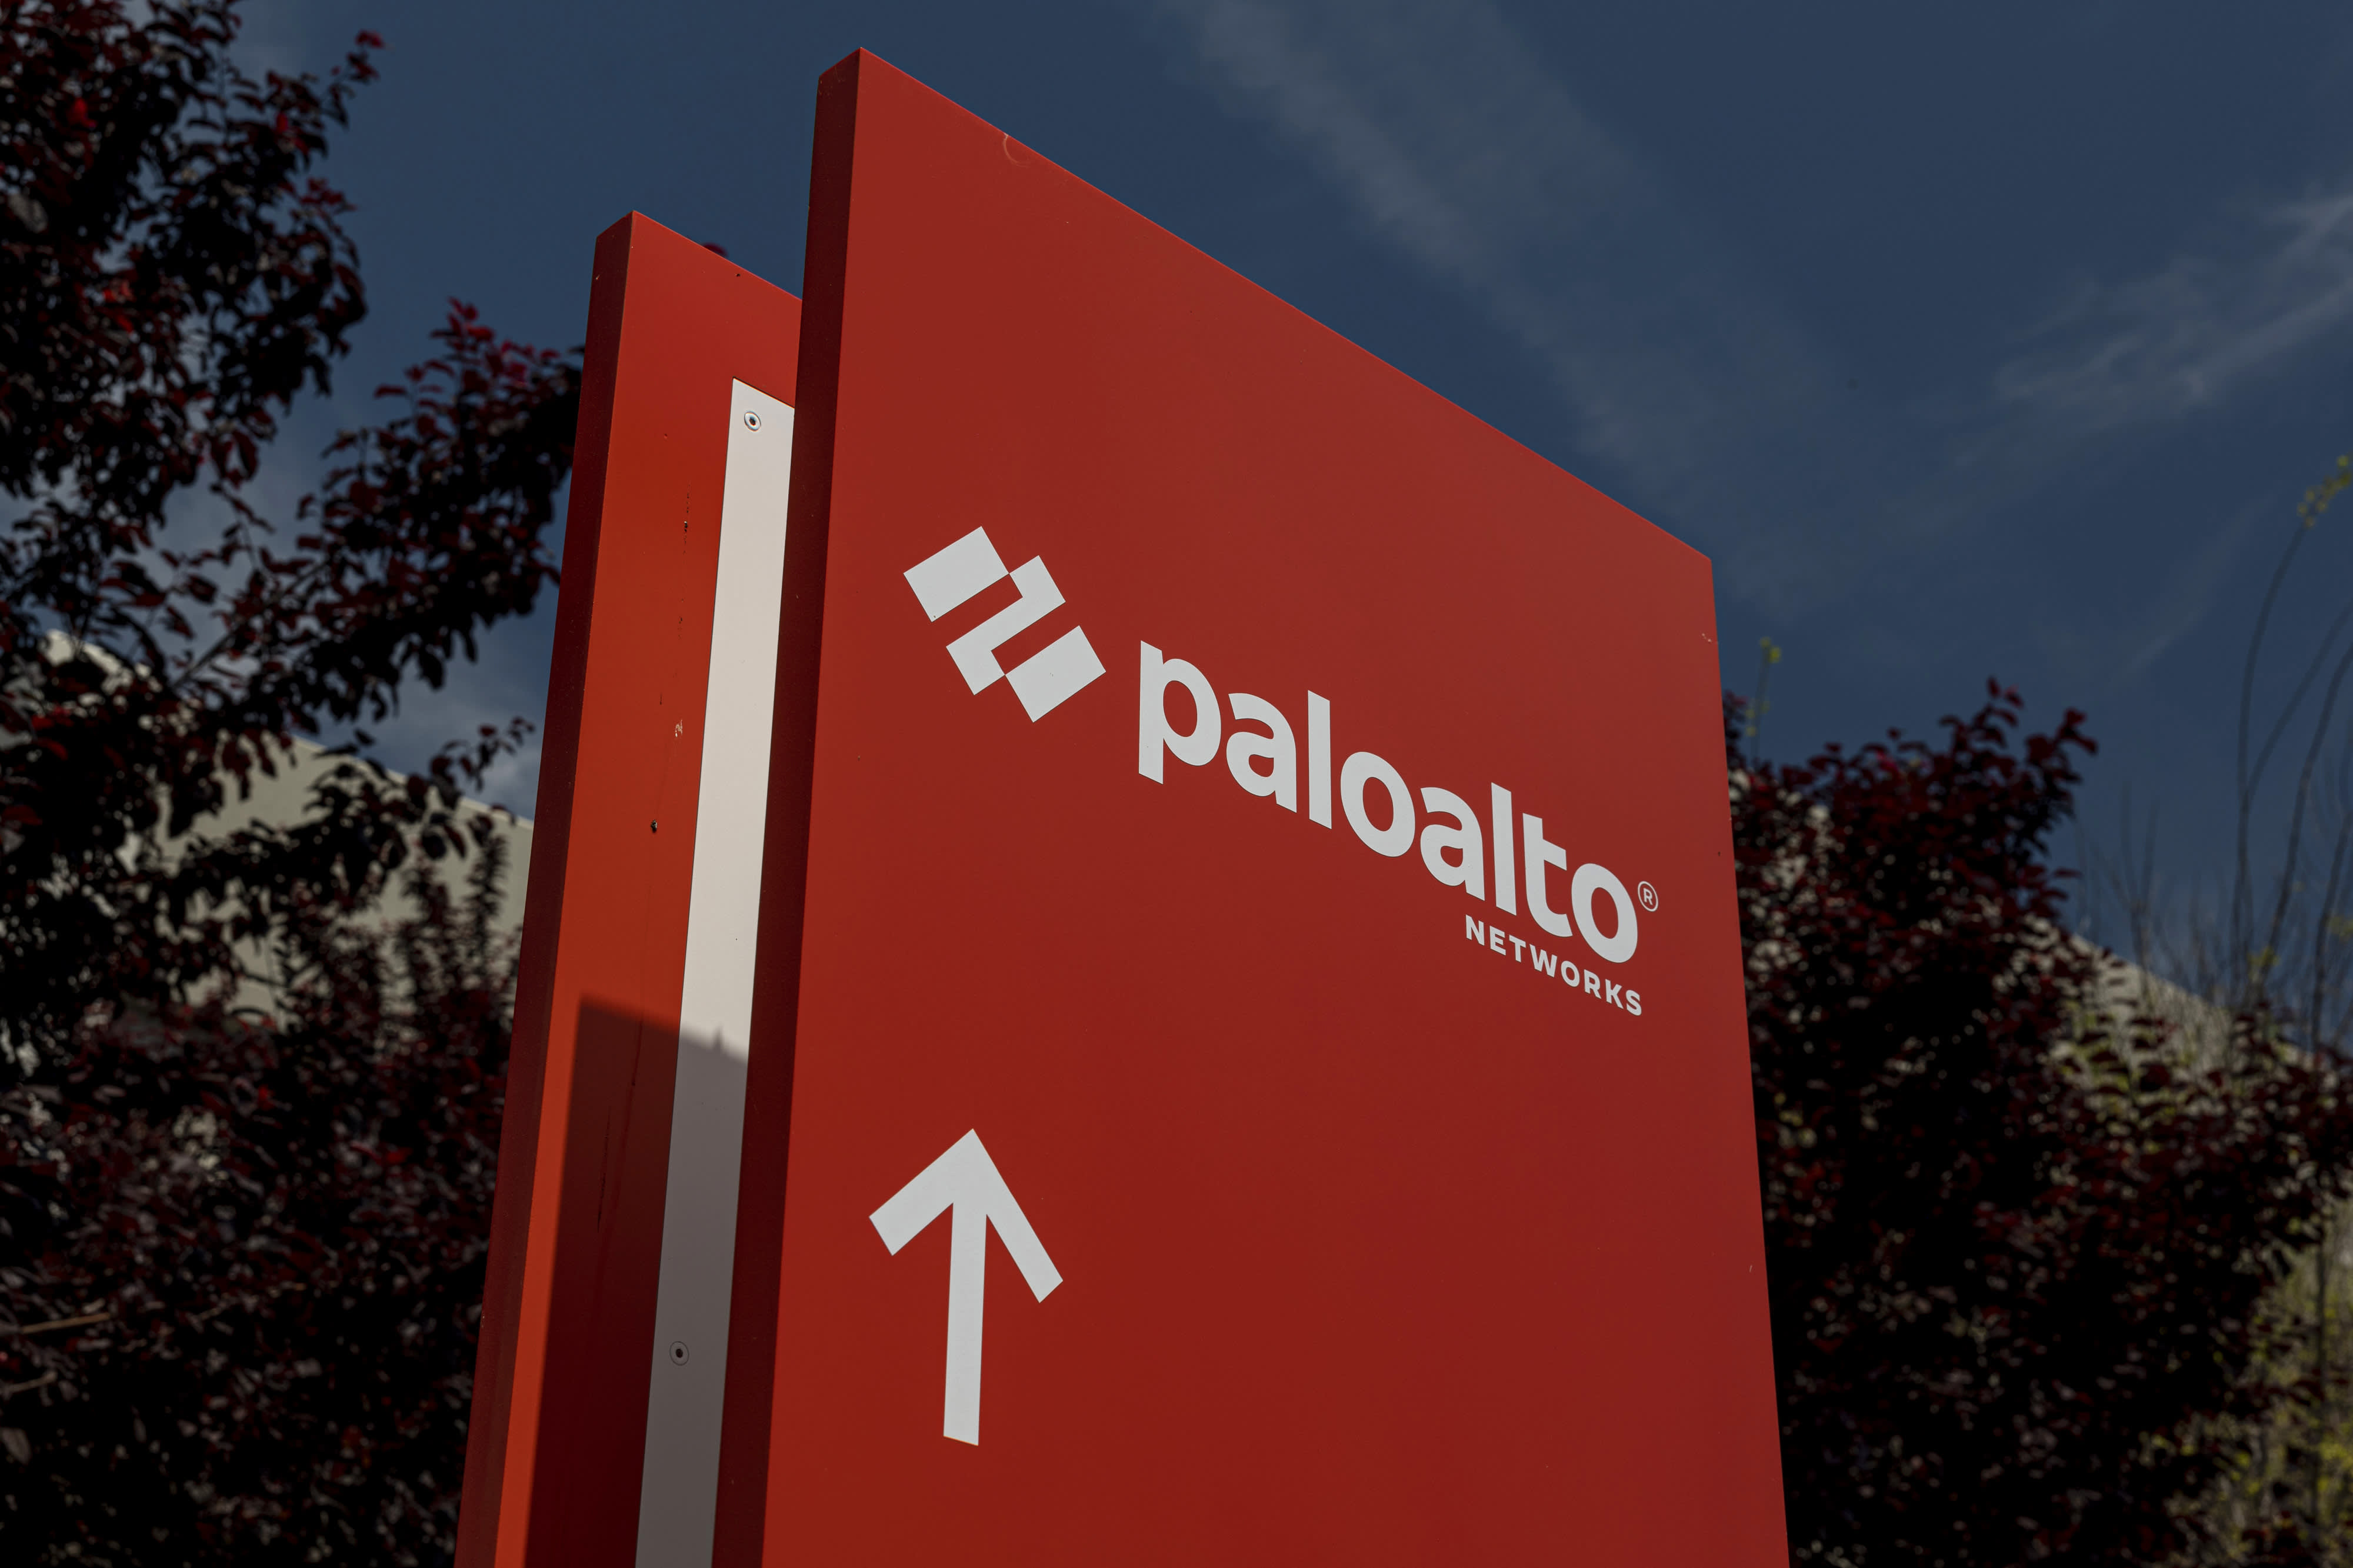 Stocks making the biggest moves after hours: Palo Alto Networks, Virgin Galactic & more - CNBC